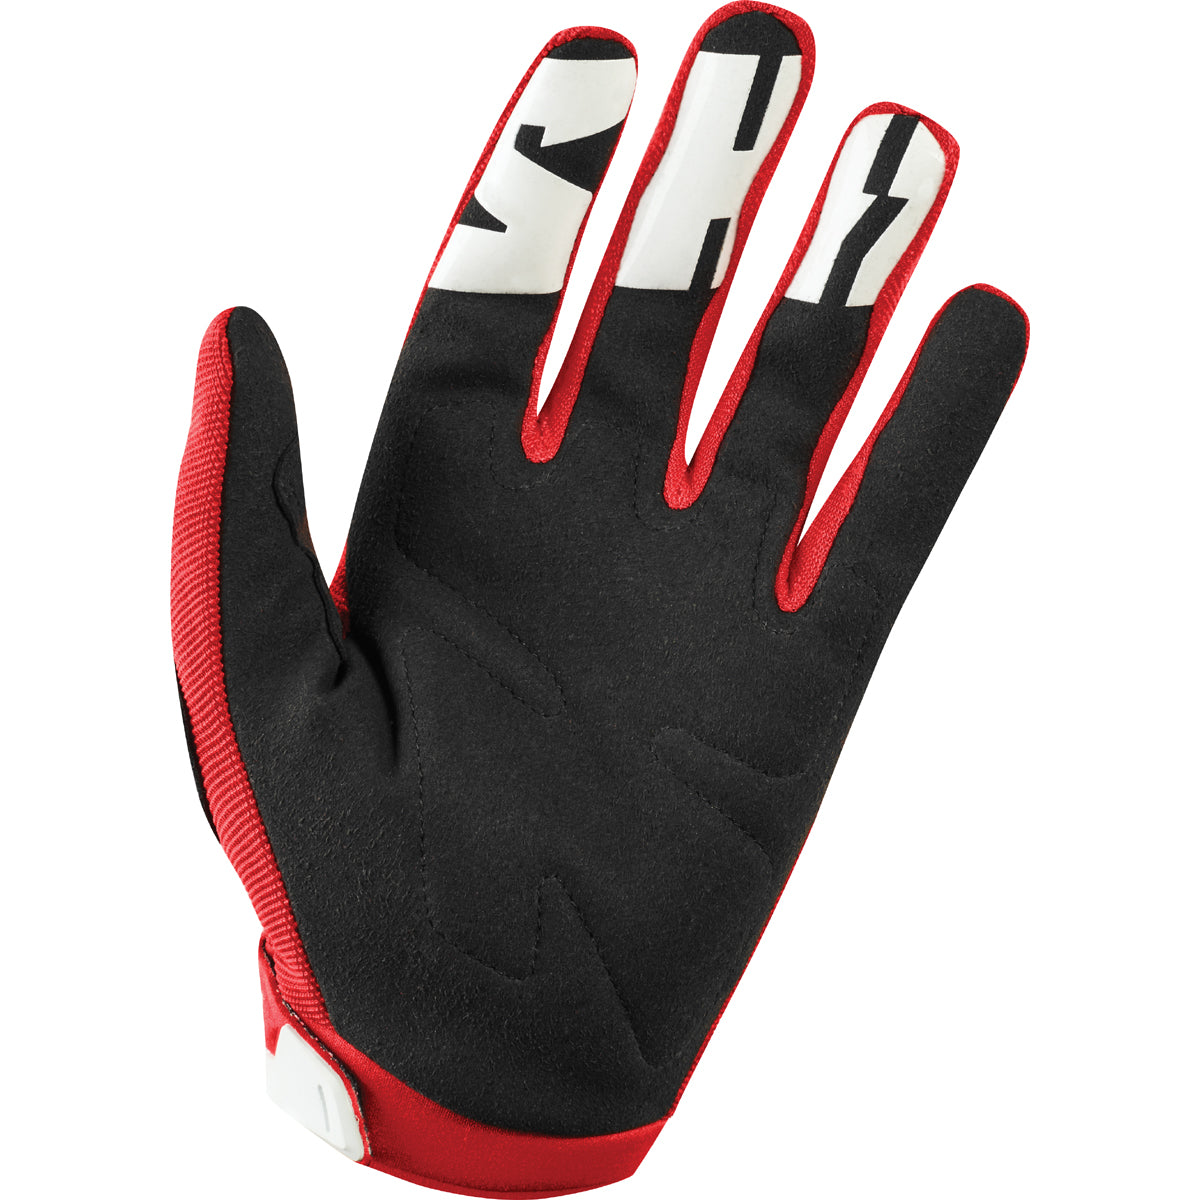 Whit3 Air Gloves Red